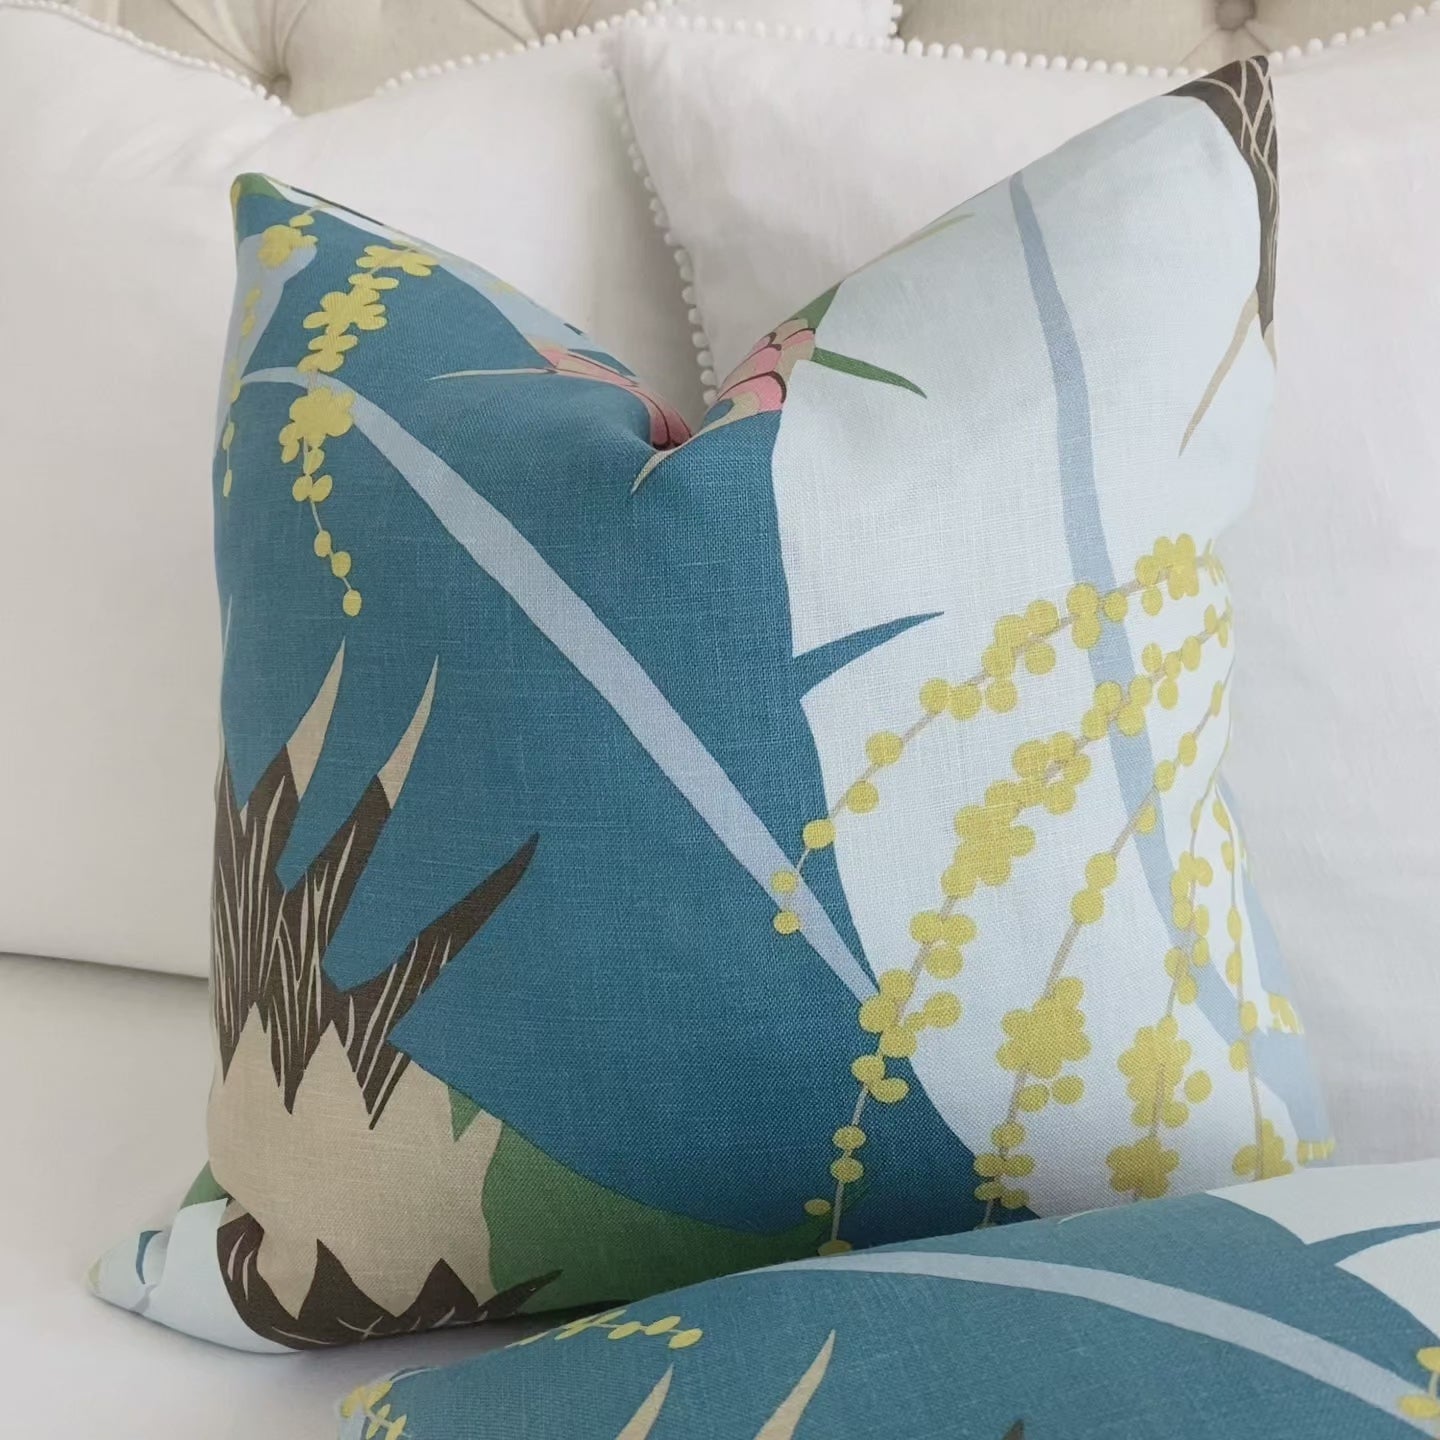 Schumacher Ananas Peacock Blue Pineapple Designer Luxury Throw Pillow Cover Product Video